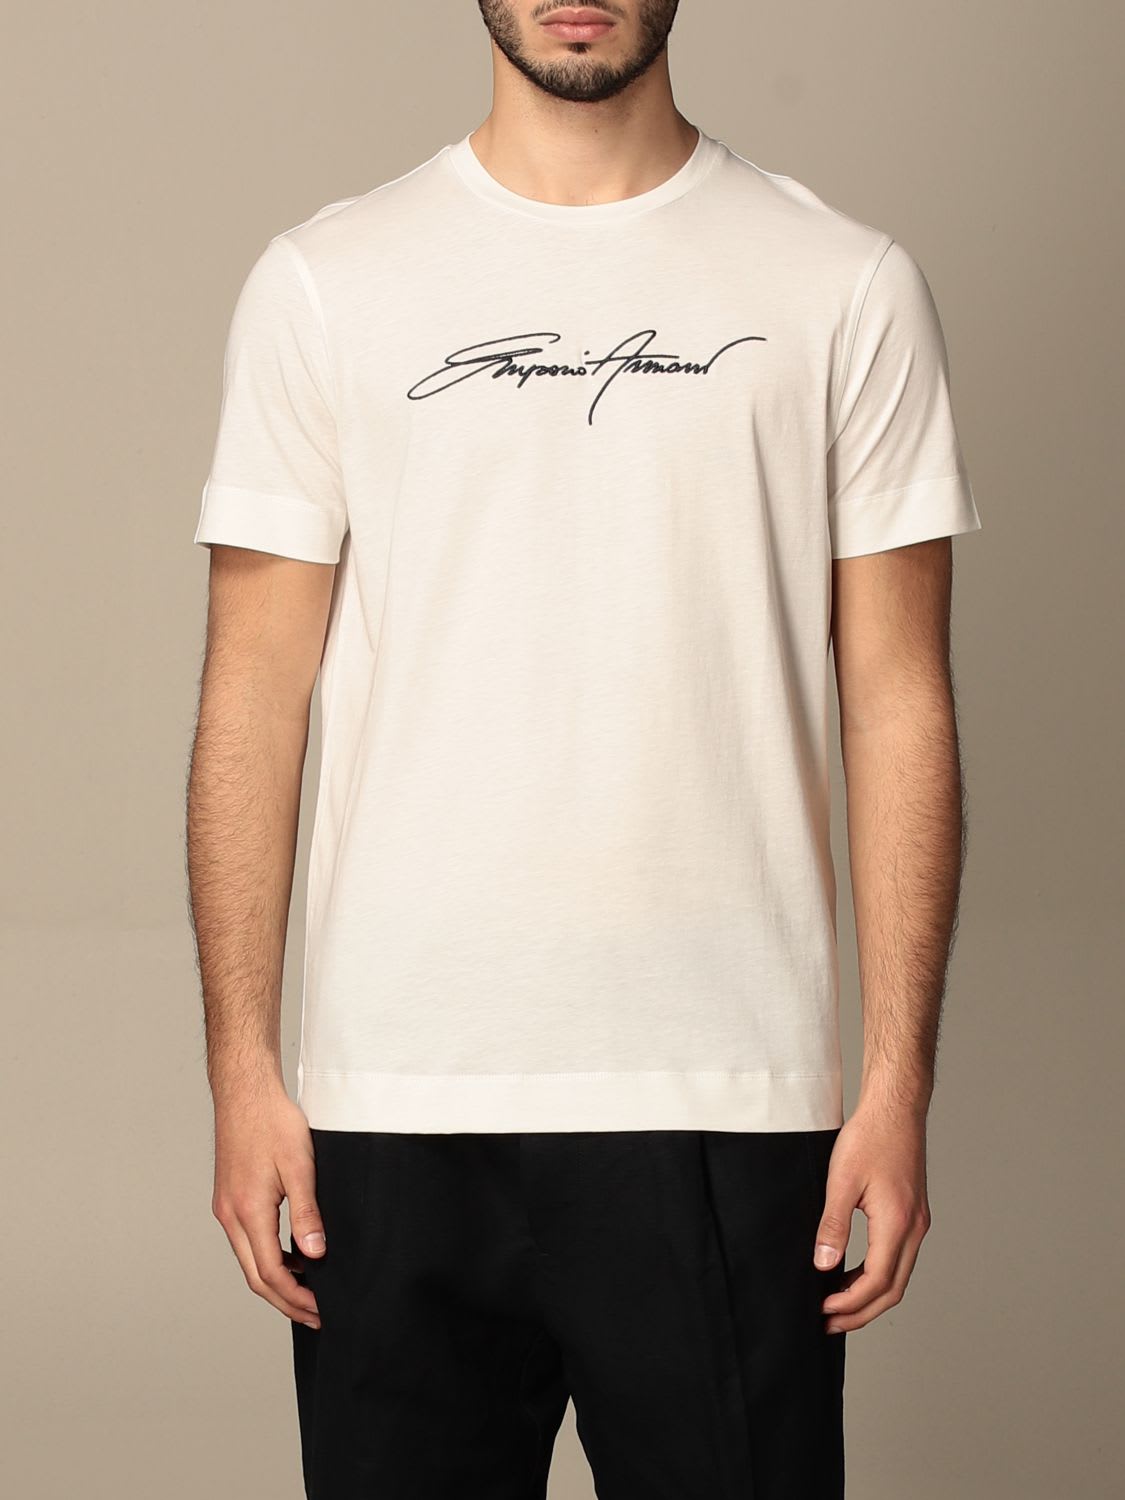 Emporio Armani T-shirt Emporio Armani T-shirt In Cotton With Signature